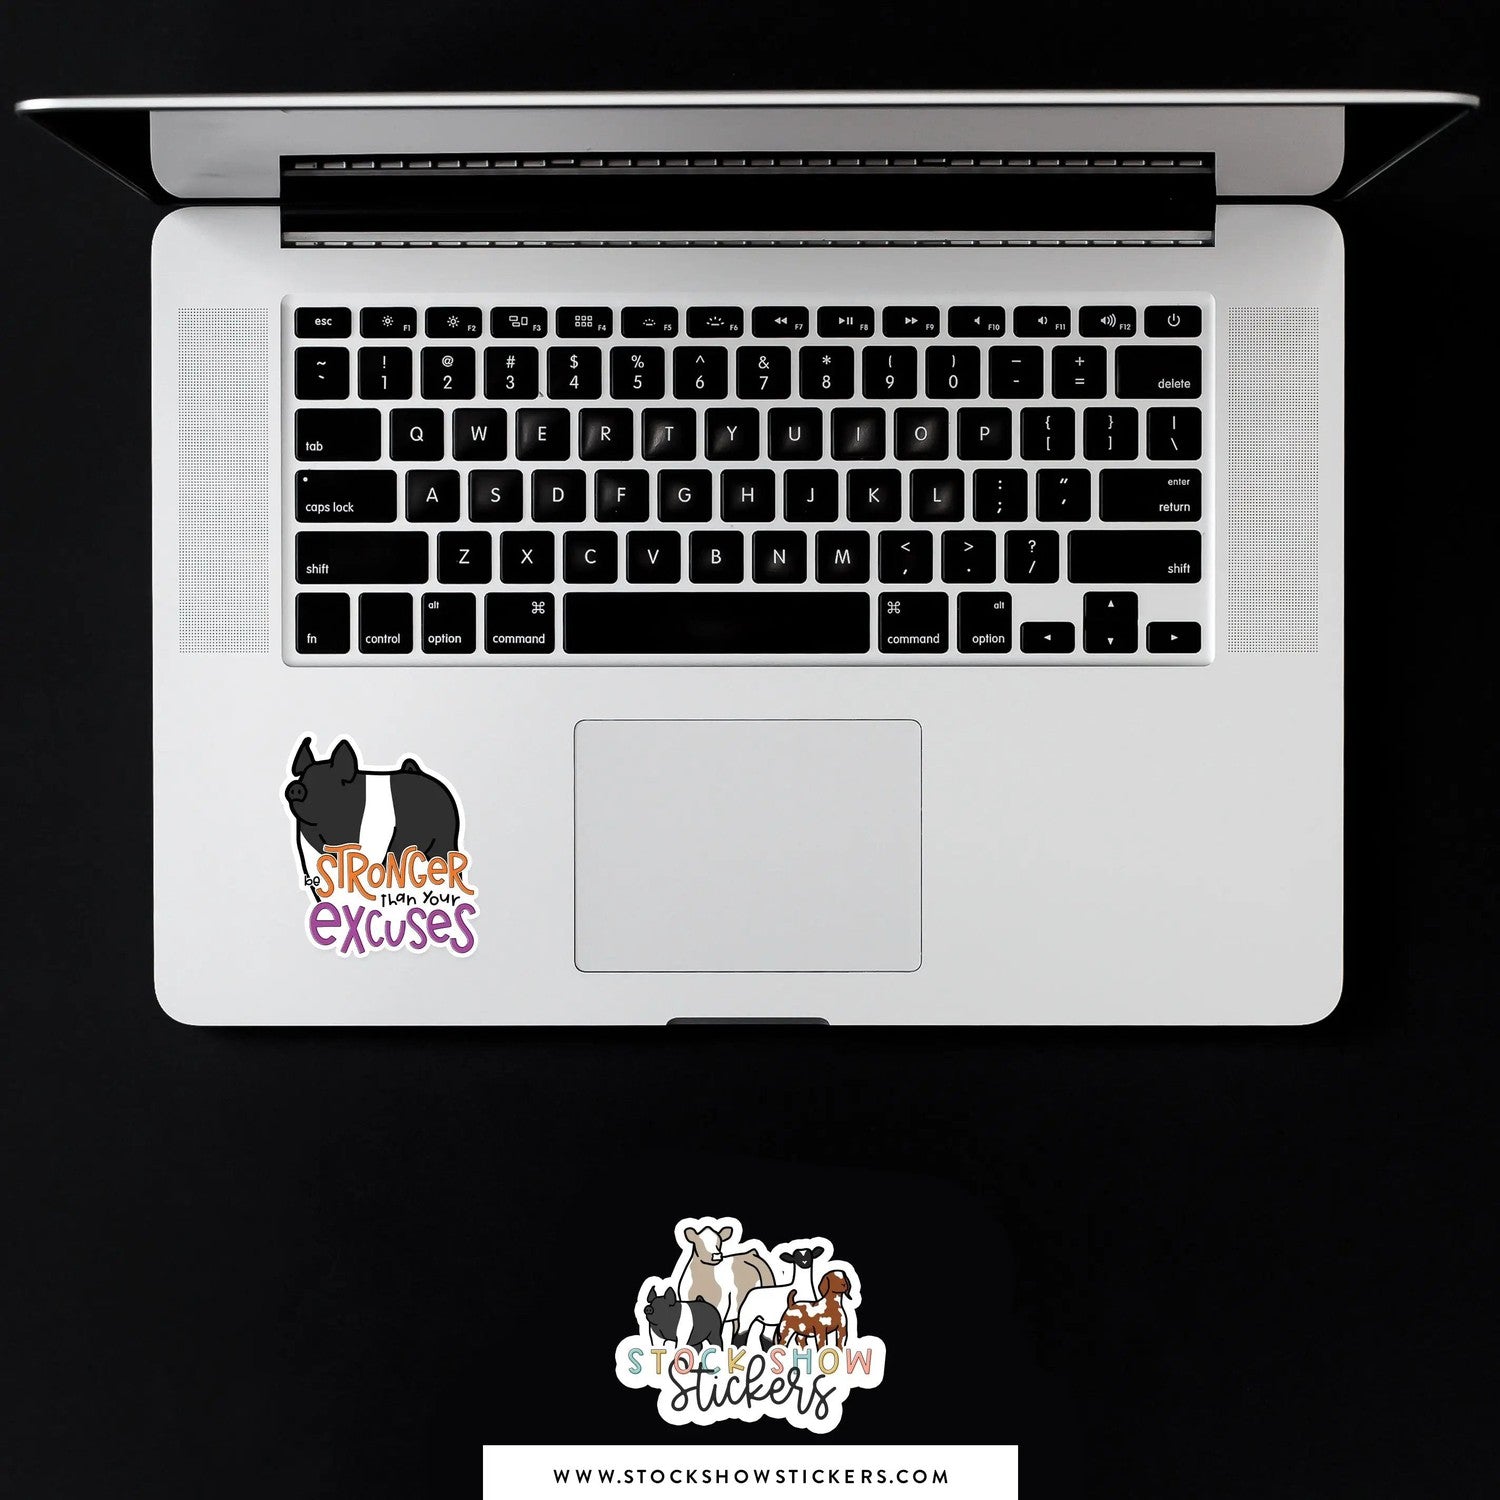 Personalized-Livestock-Stronger Than Your Excuses Livestock Stickers